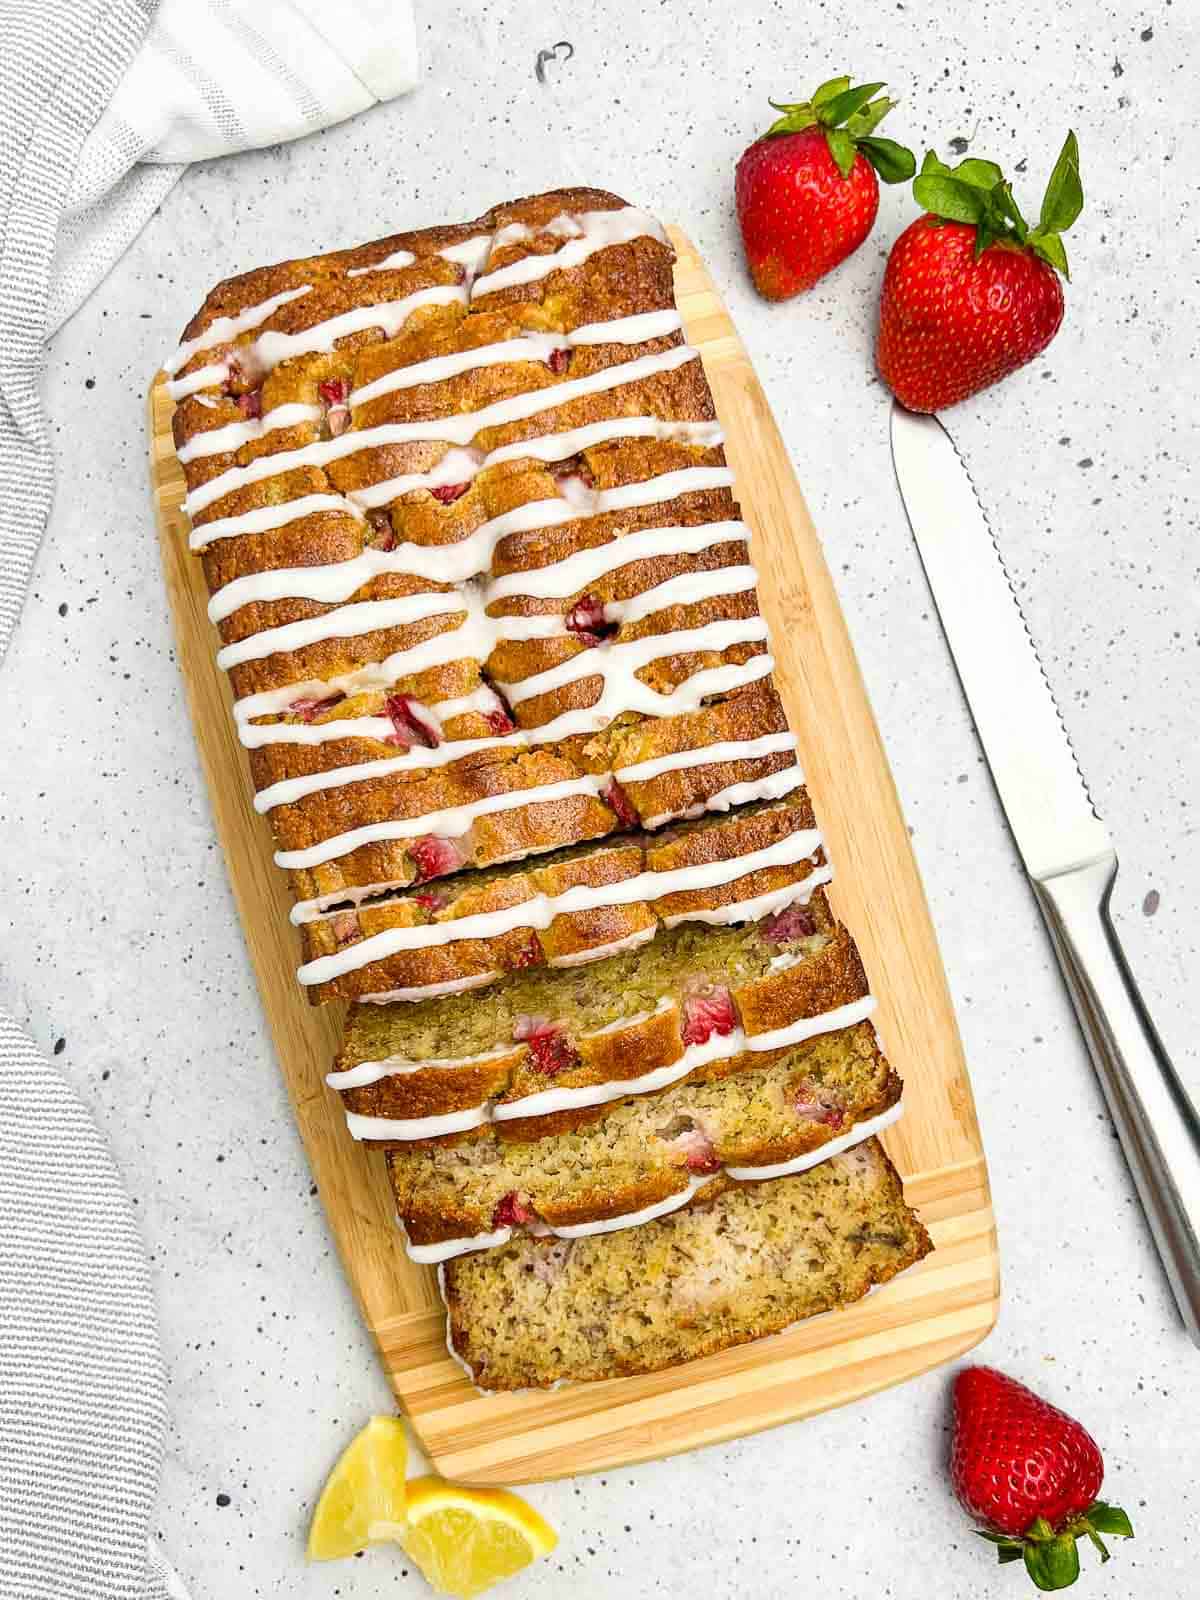 Overhead view of a loaf of almond flour banana bread with strawberries.